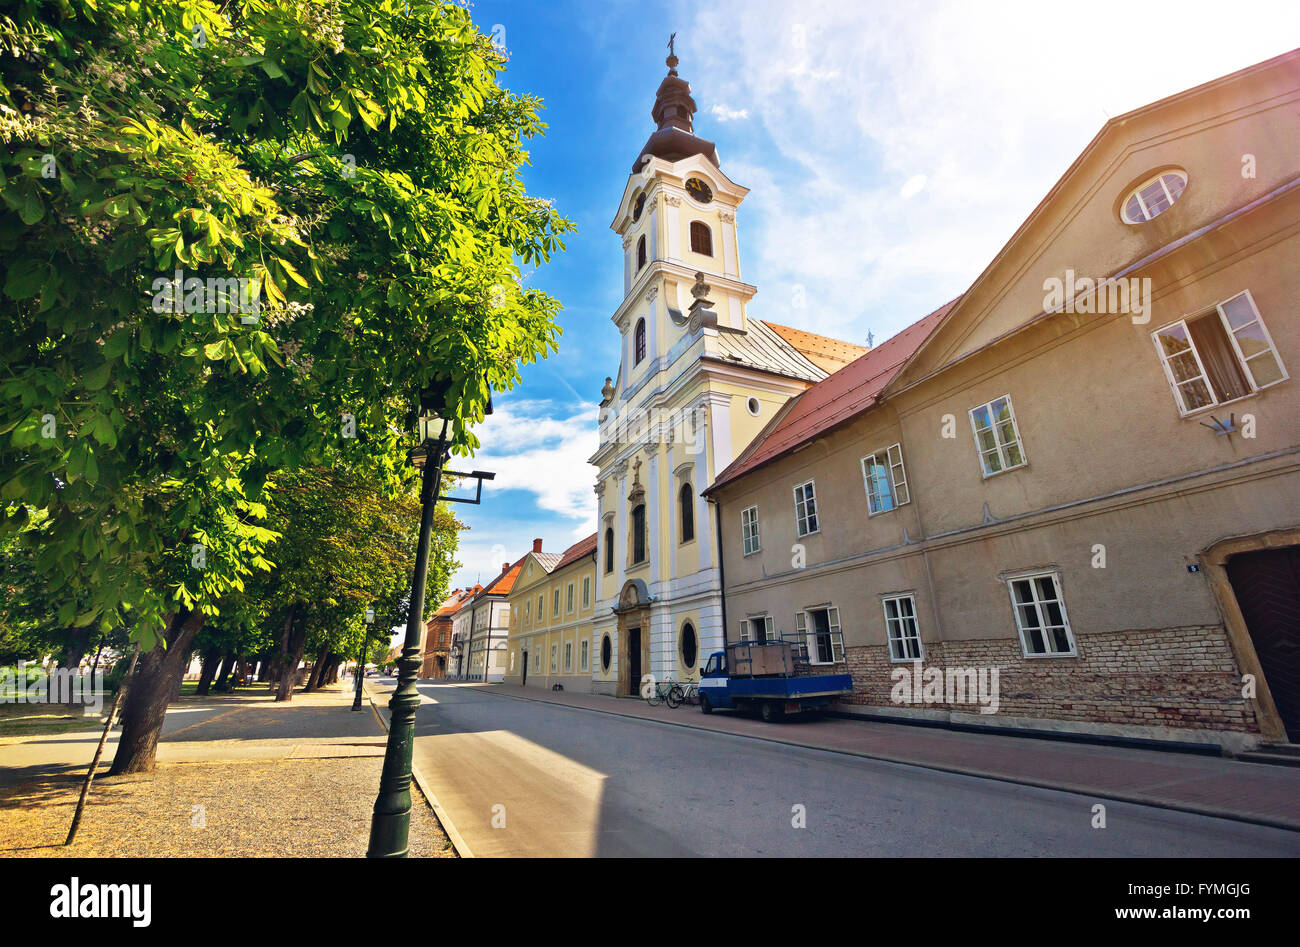 Town of Bjelovar square view Stock Photo